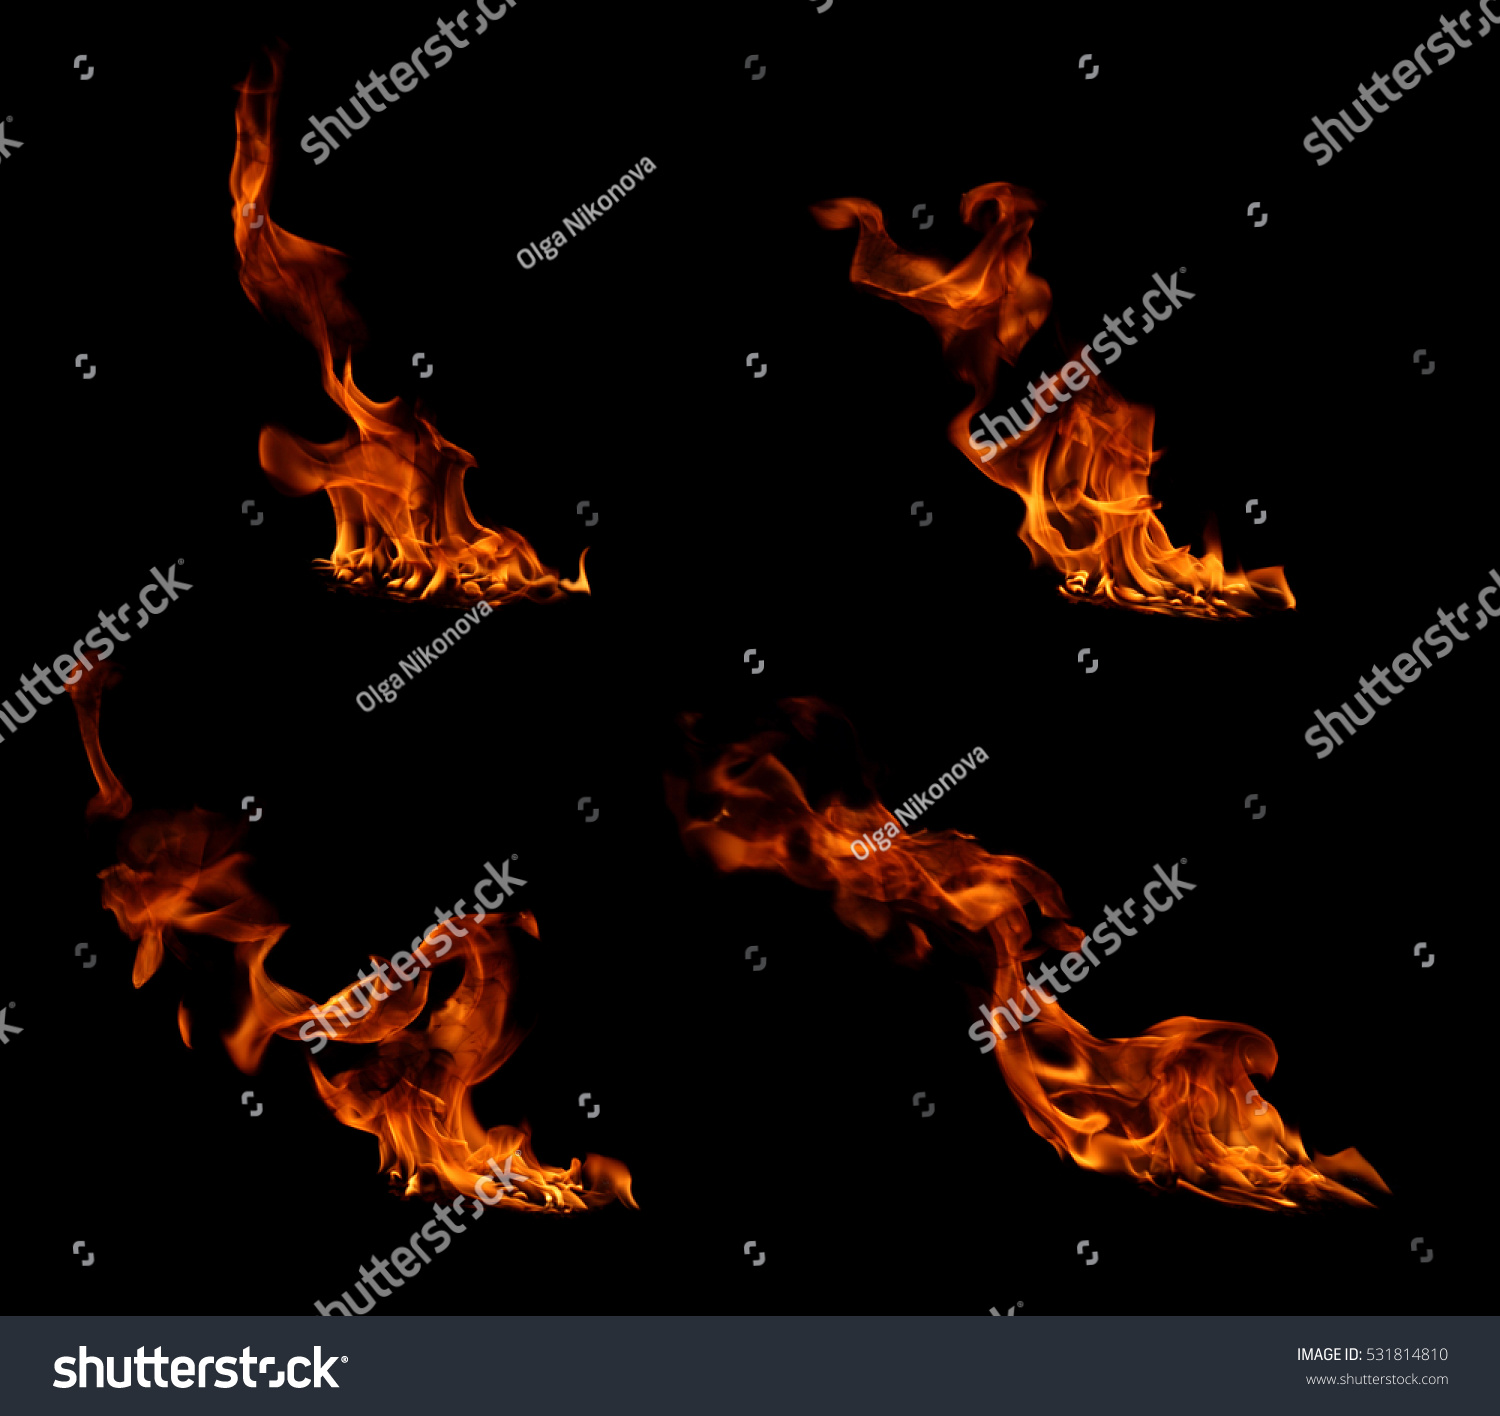 Fire flames on a black background #531814810